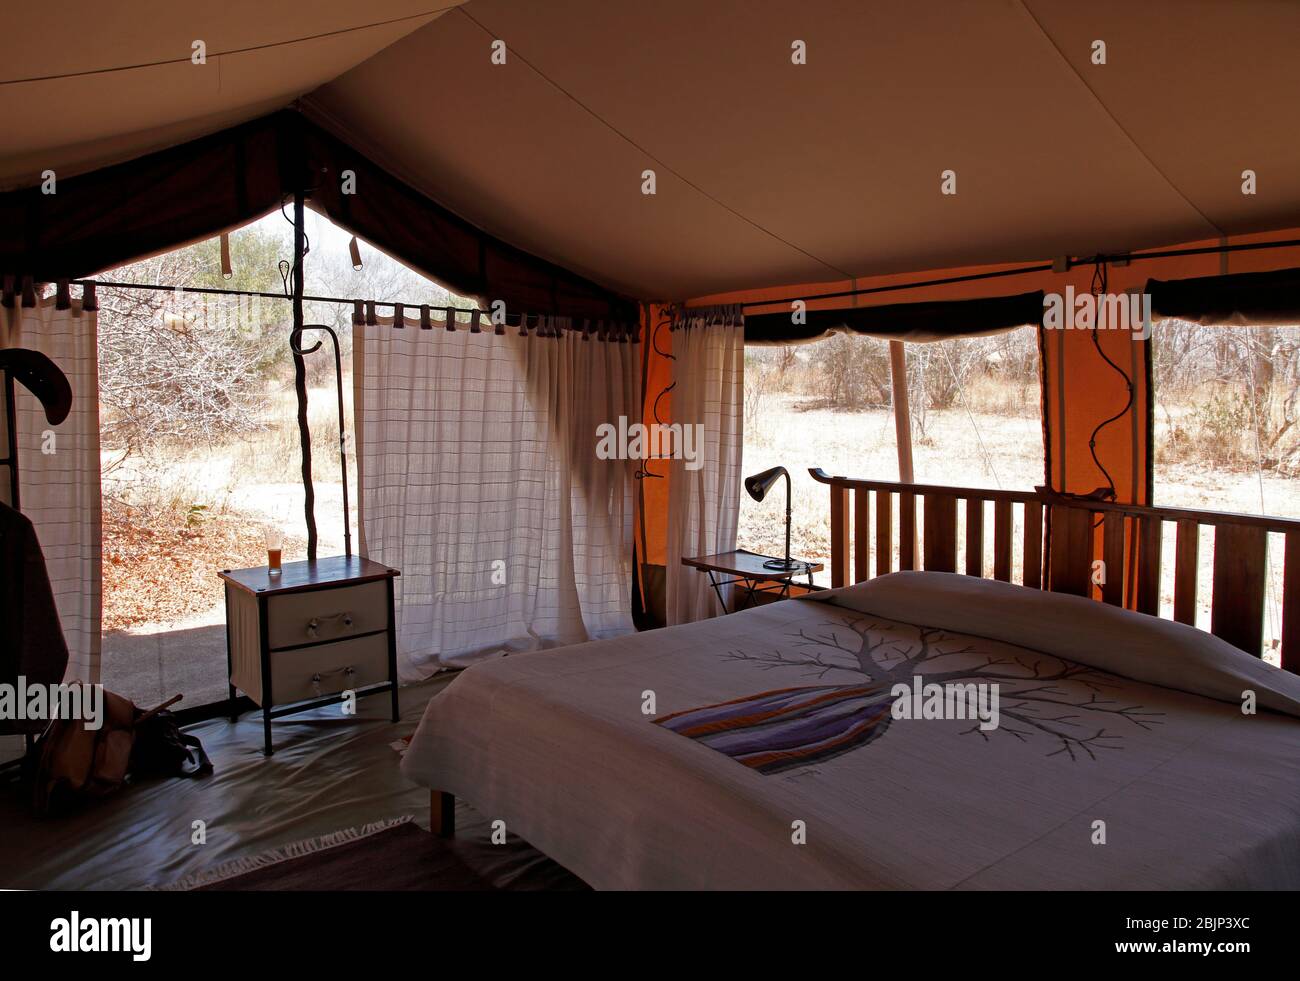 Inside view of a safari tent in East Africa Stock Photo